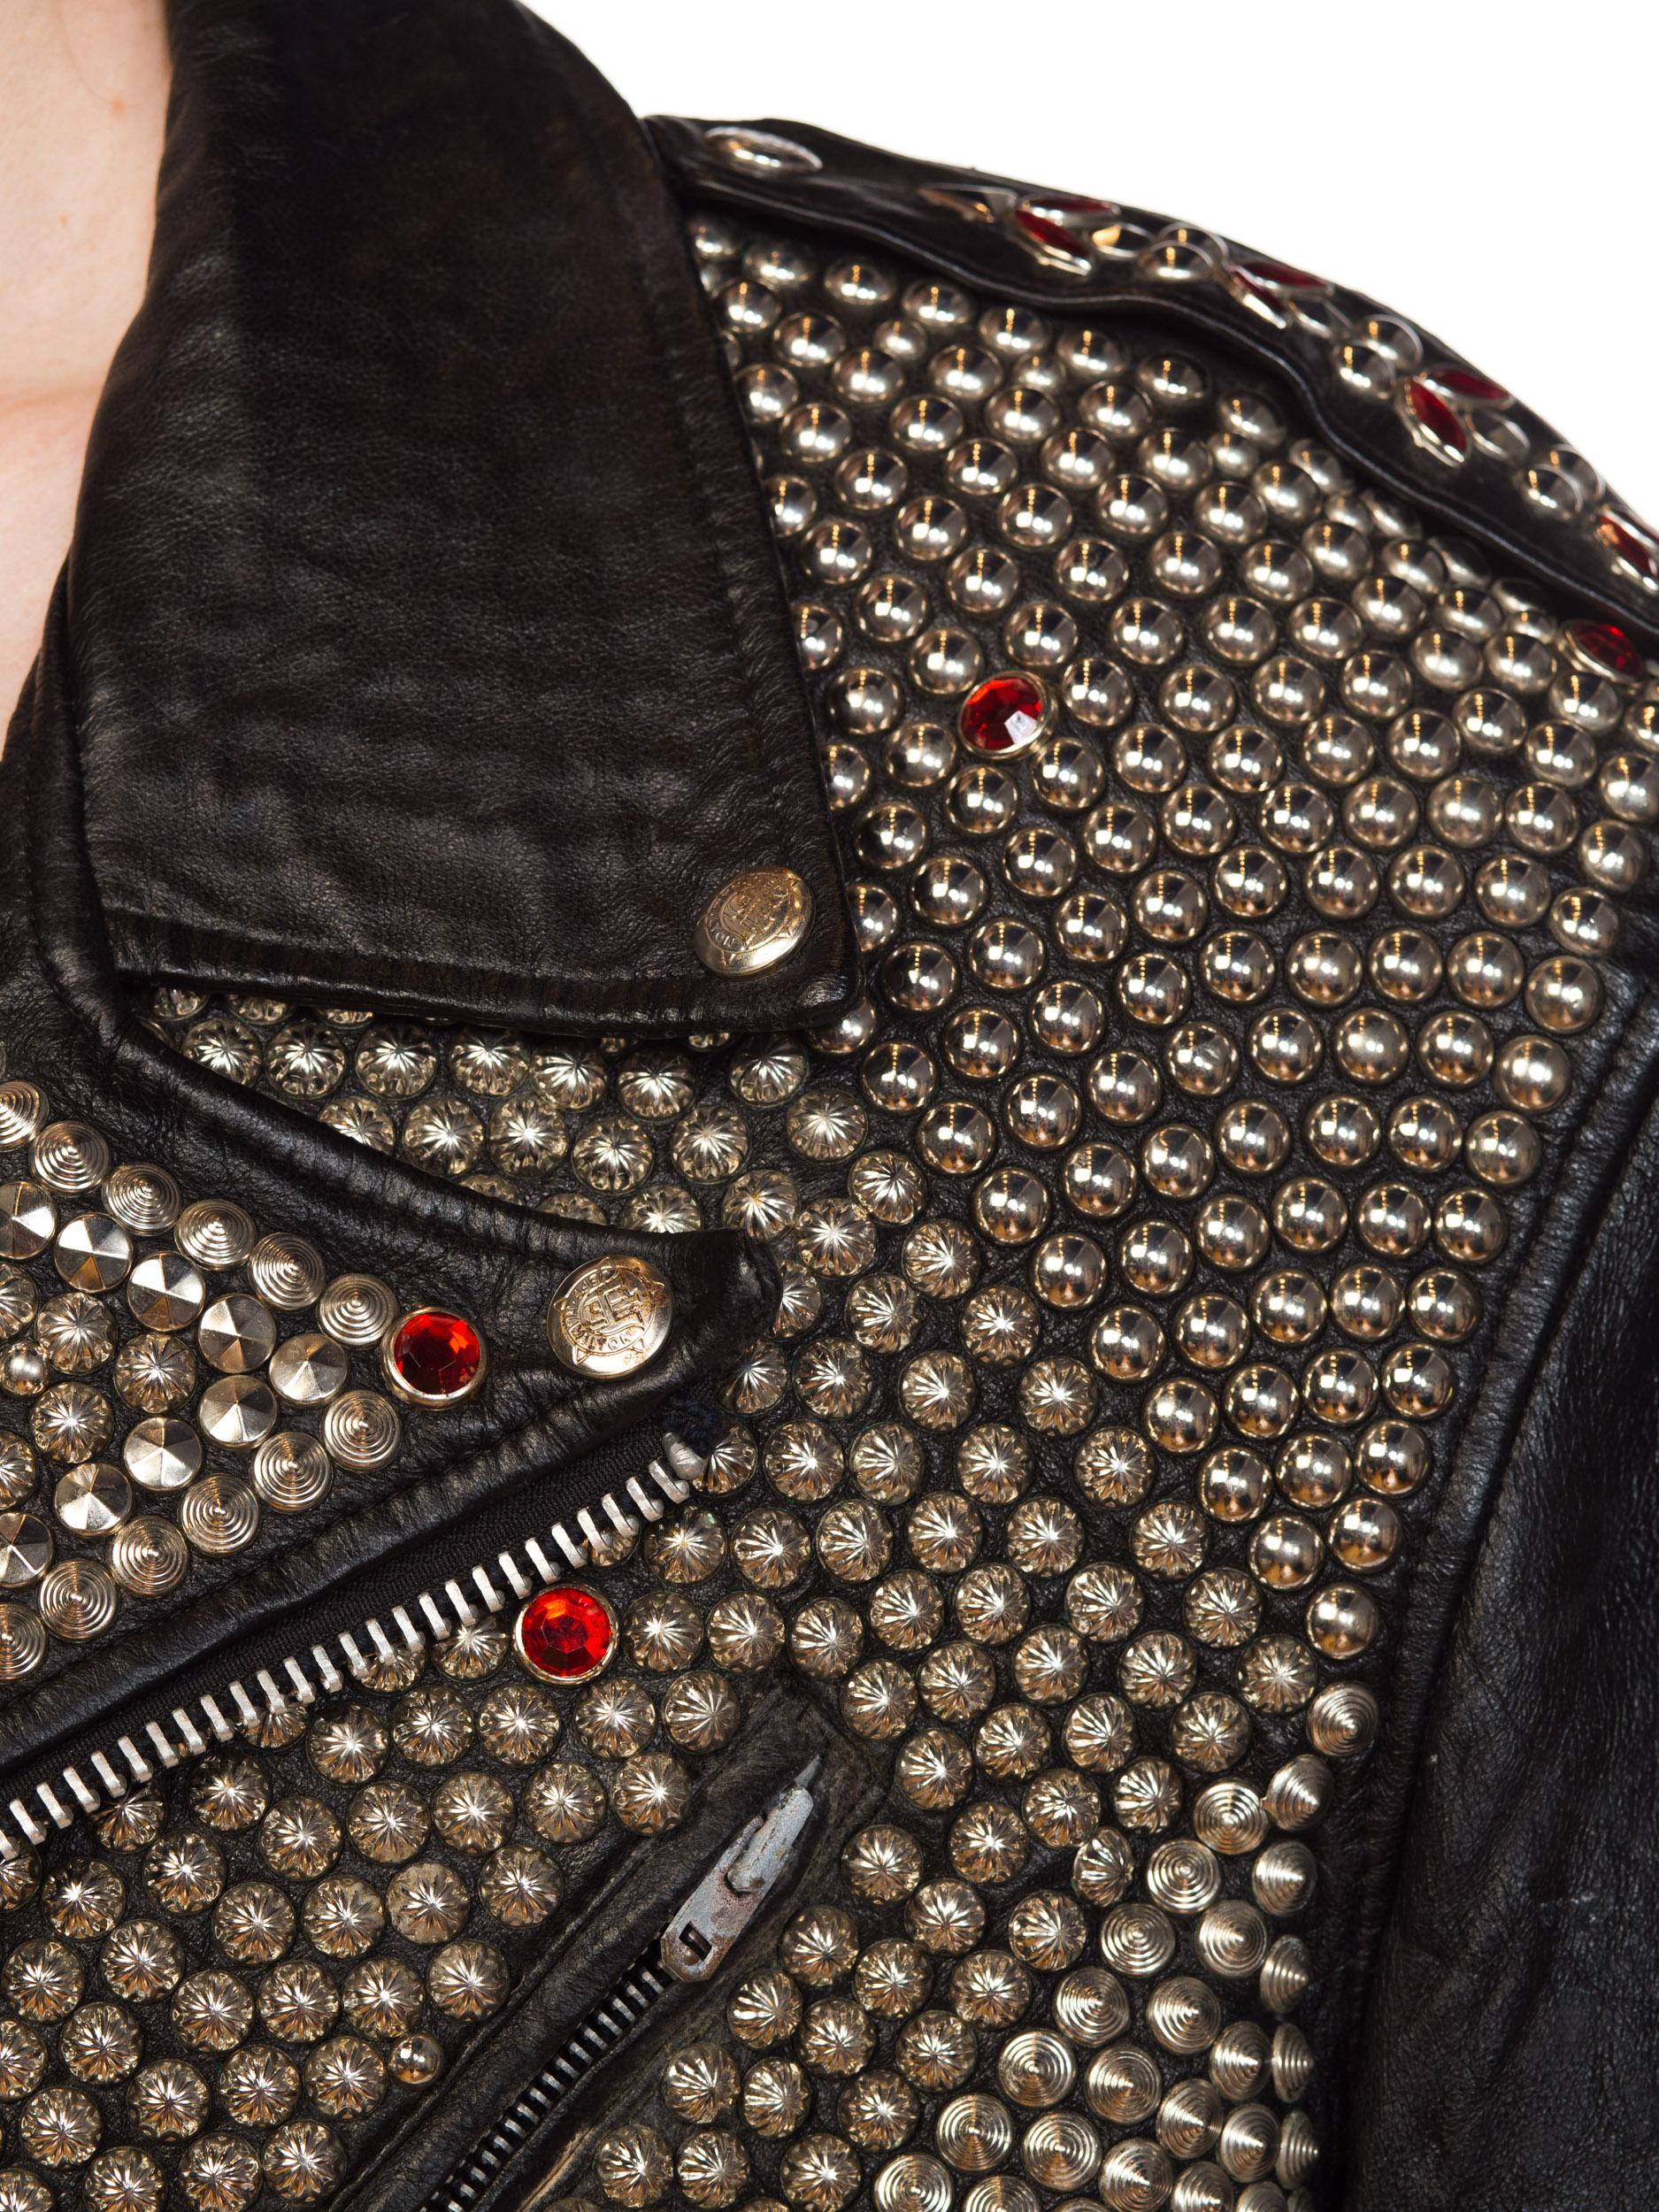 Leather Biker Jacket Covered in Studs & Crystals 11